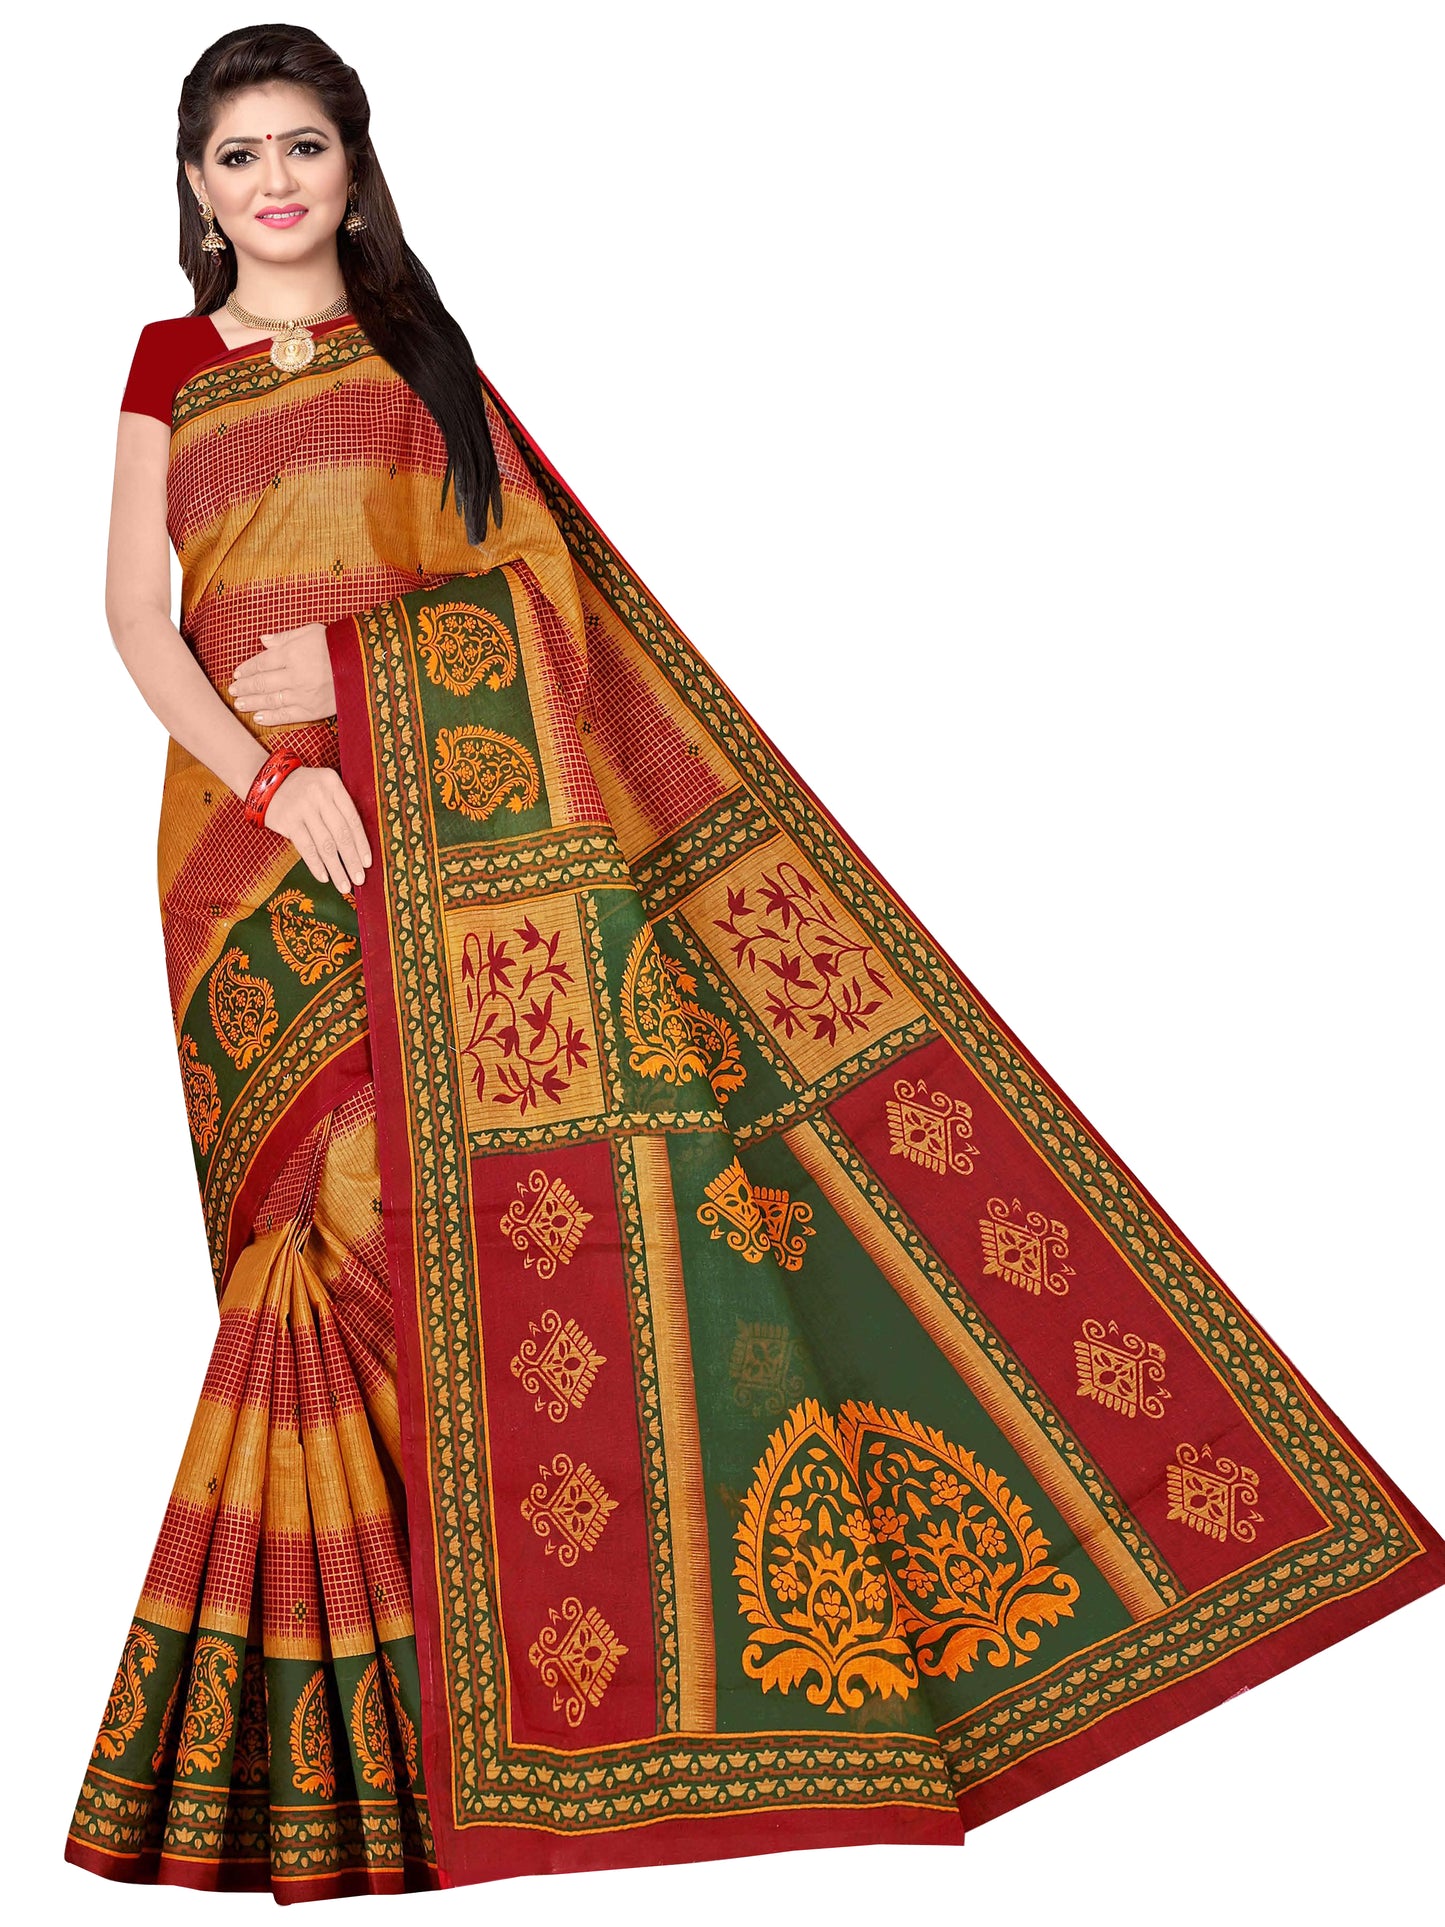 Pure Cotton Saree for Women, Casual Wear (Item Code: XYZCCSKR4)